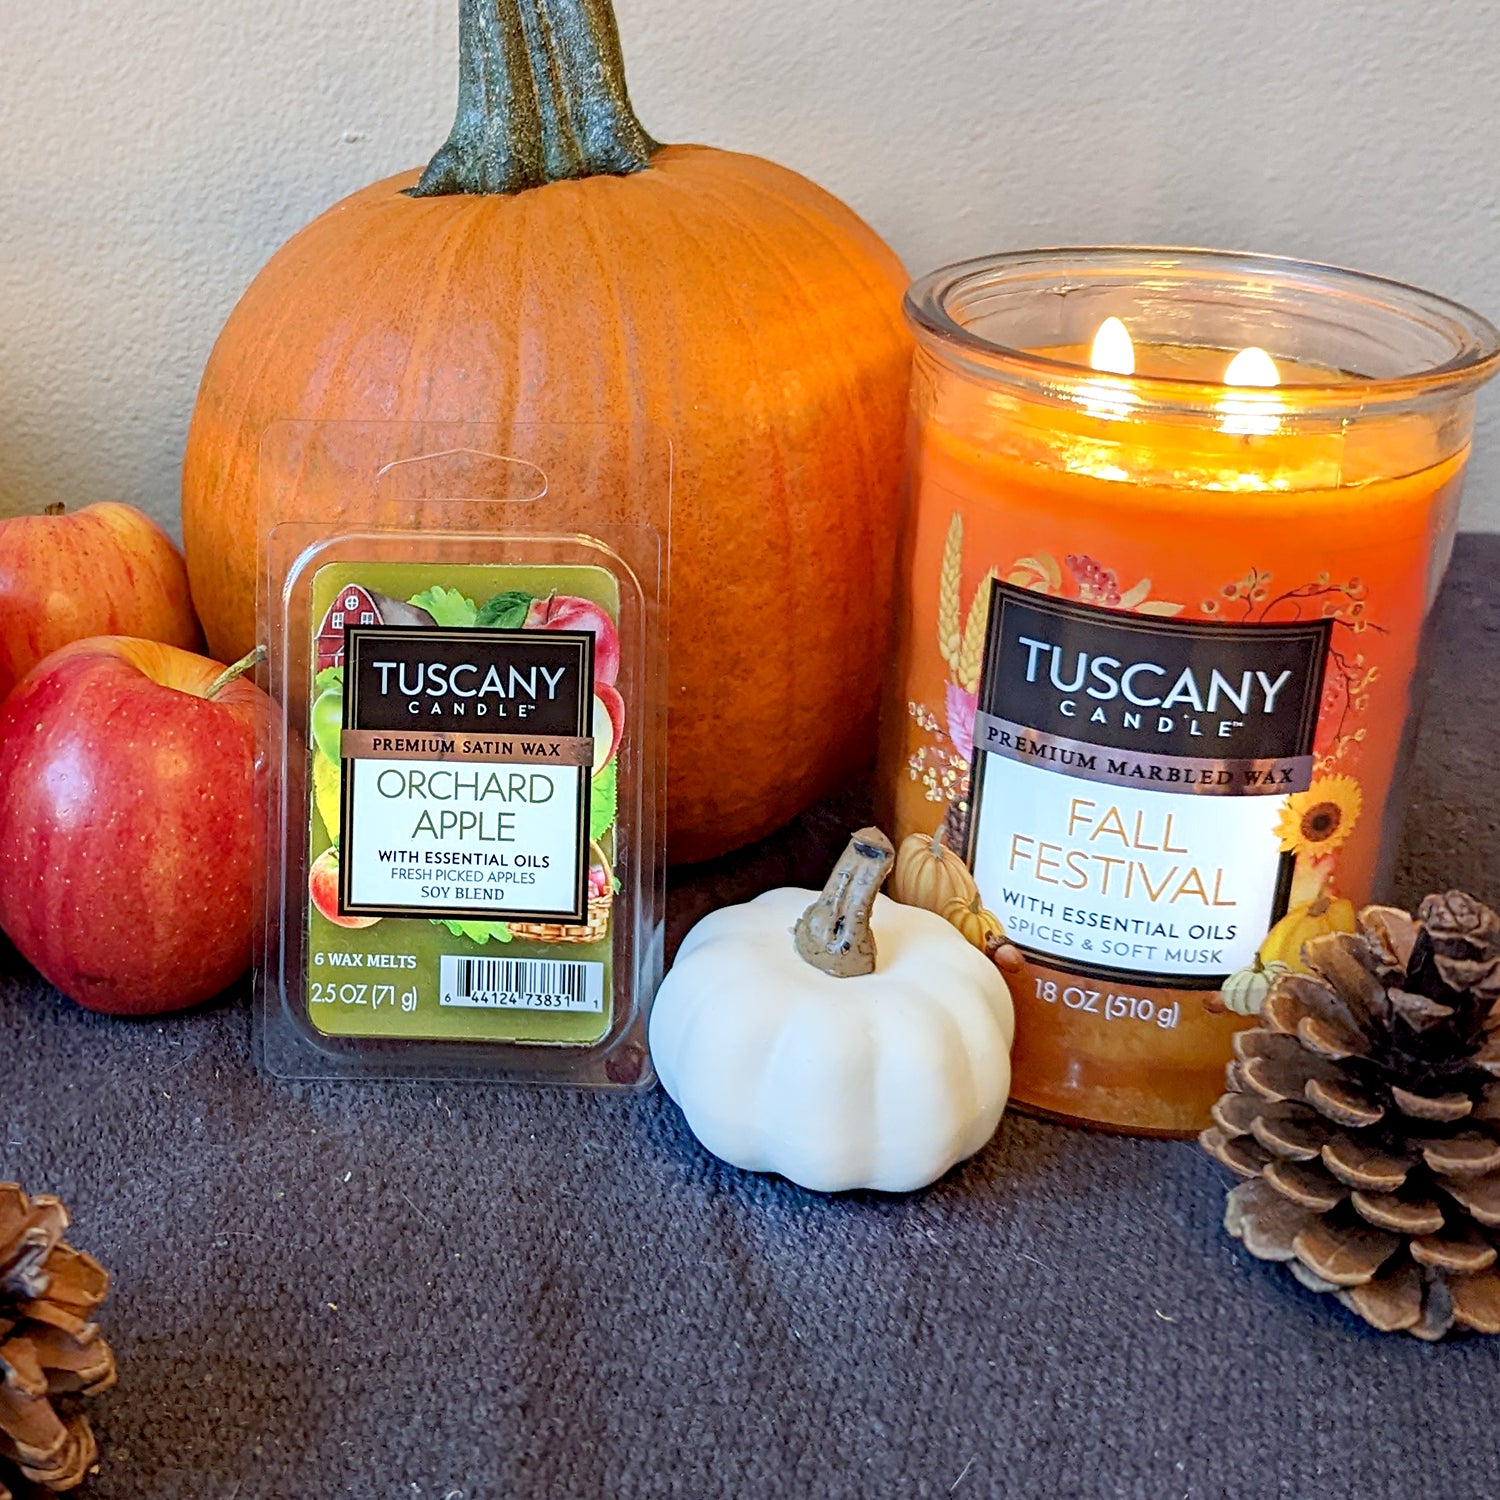 Fall Festival is one of the most popular fall scented candles from Tuscany Candle